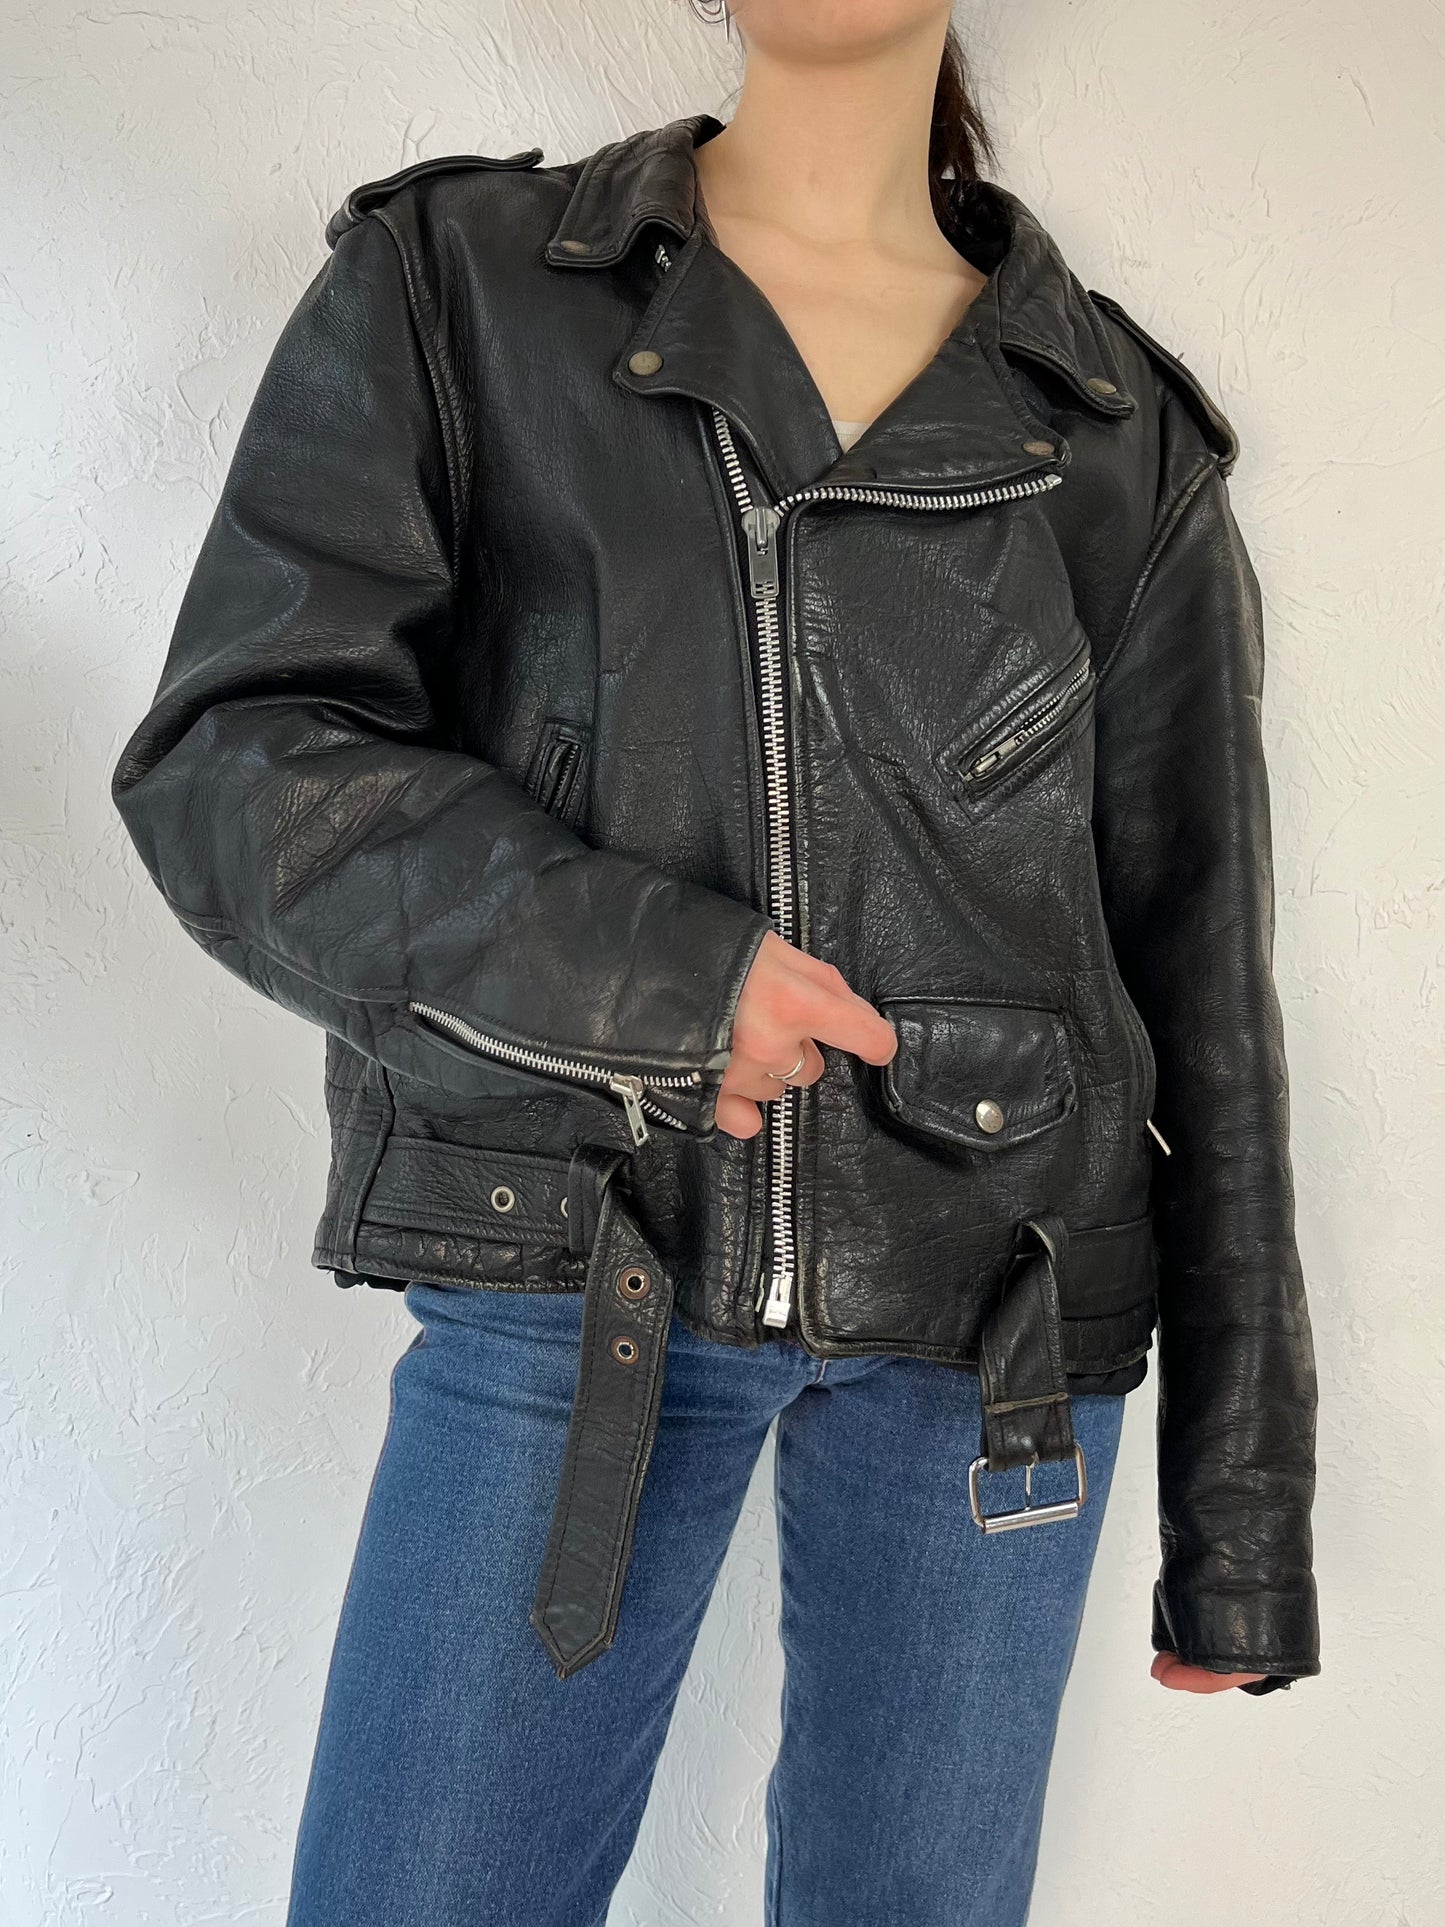 90s 'First' Harley Davidson Heavy Duty Leather Jacket / Large